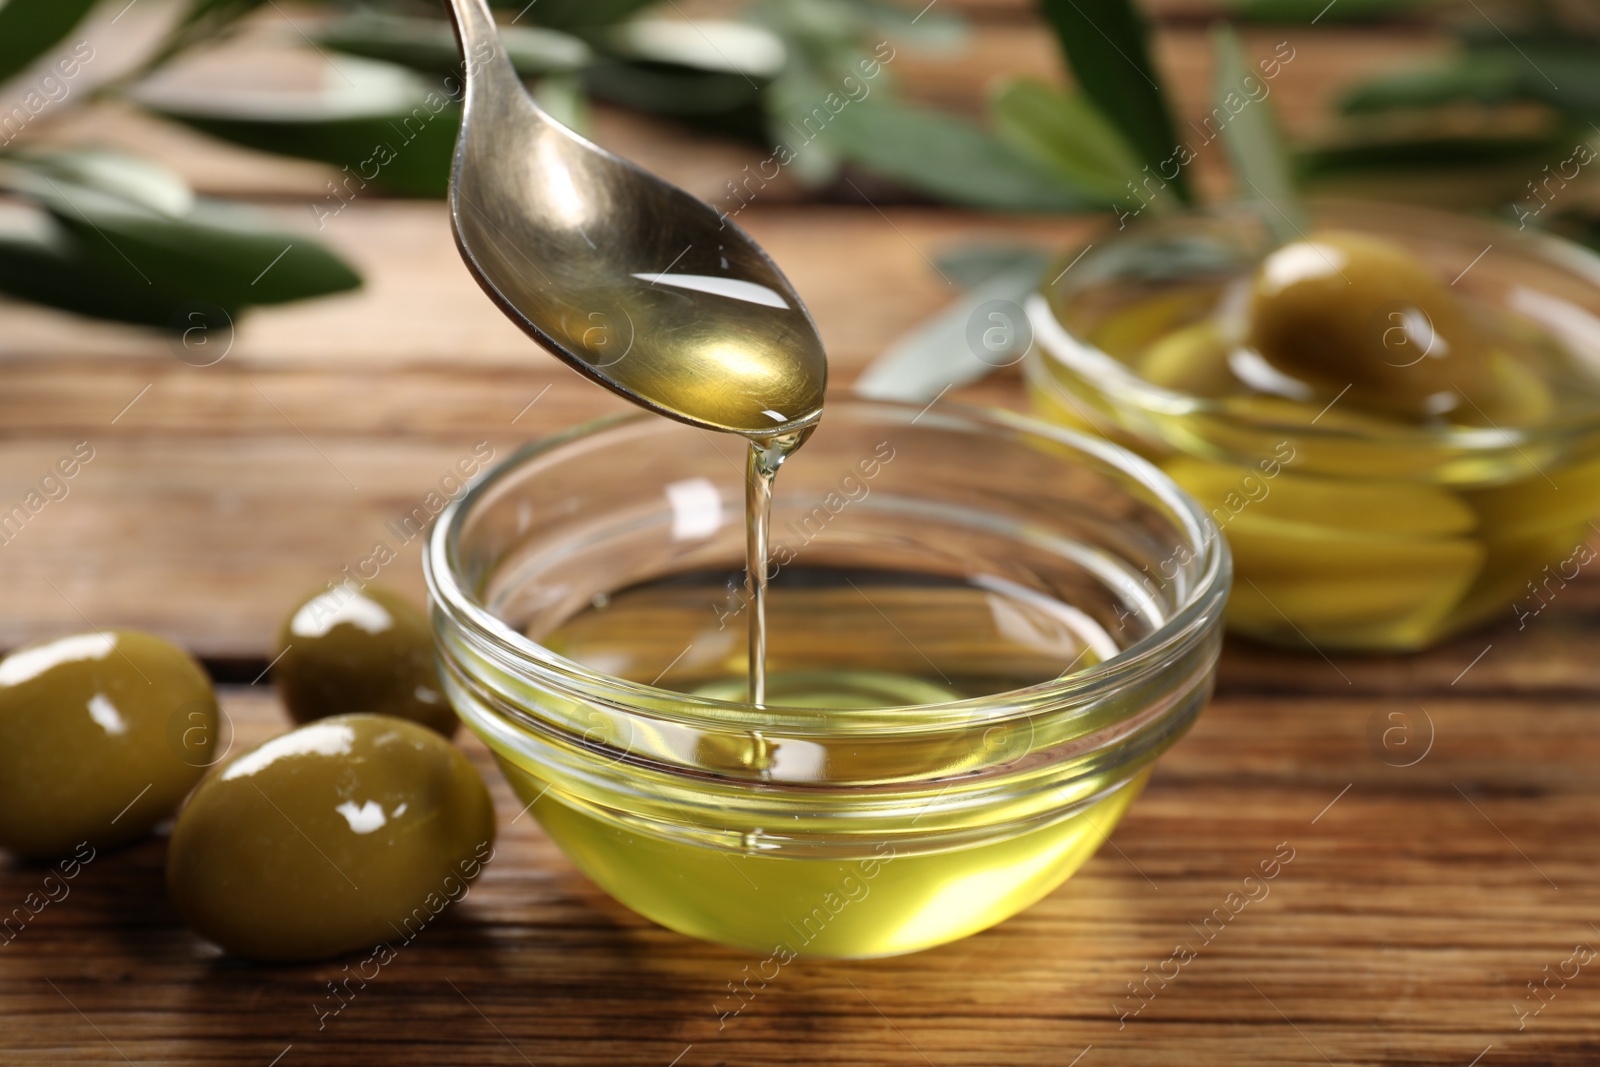 Photo of Spoon with cooking oil over bowl and olives on wooden table, closeup